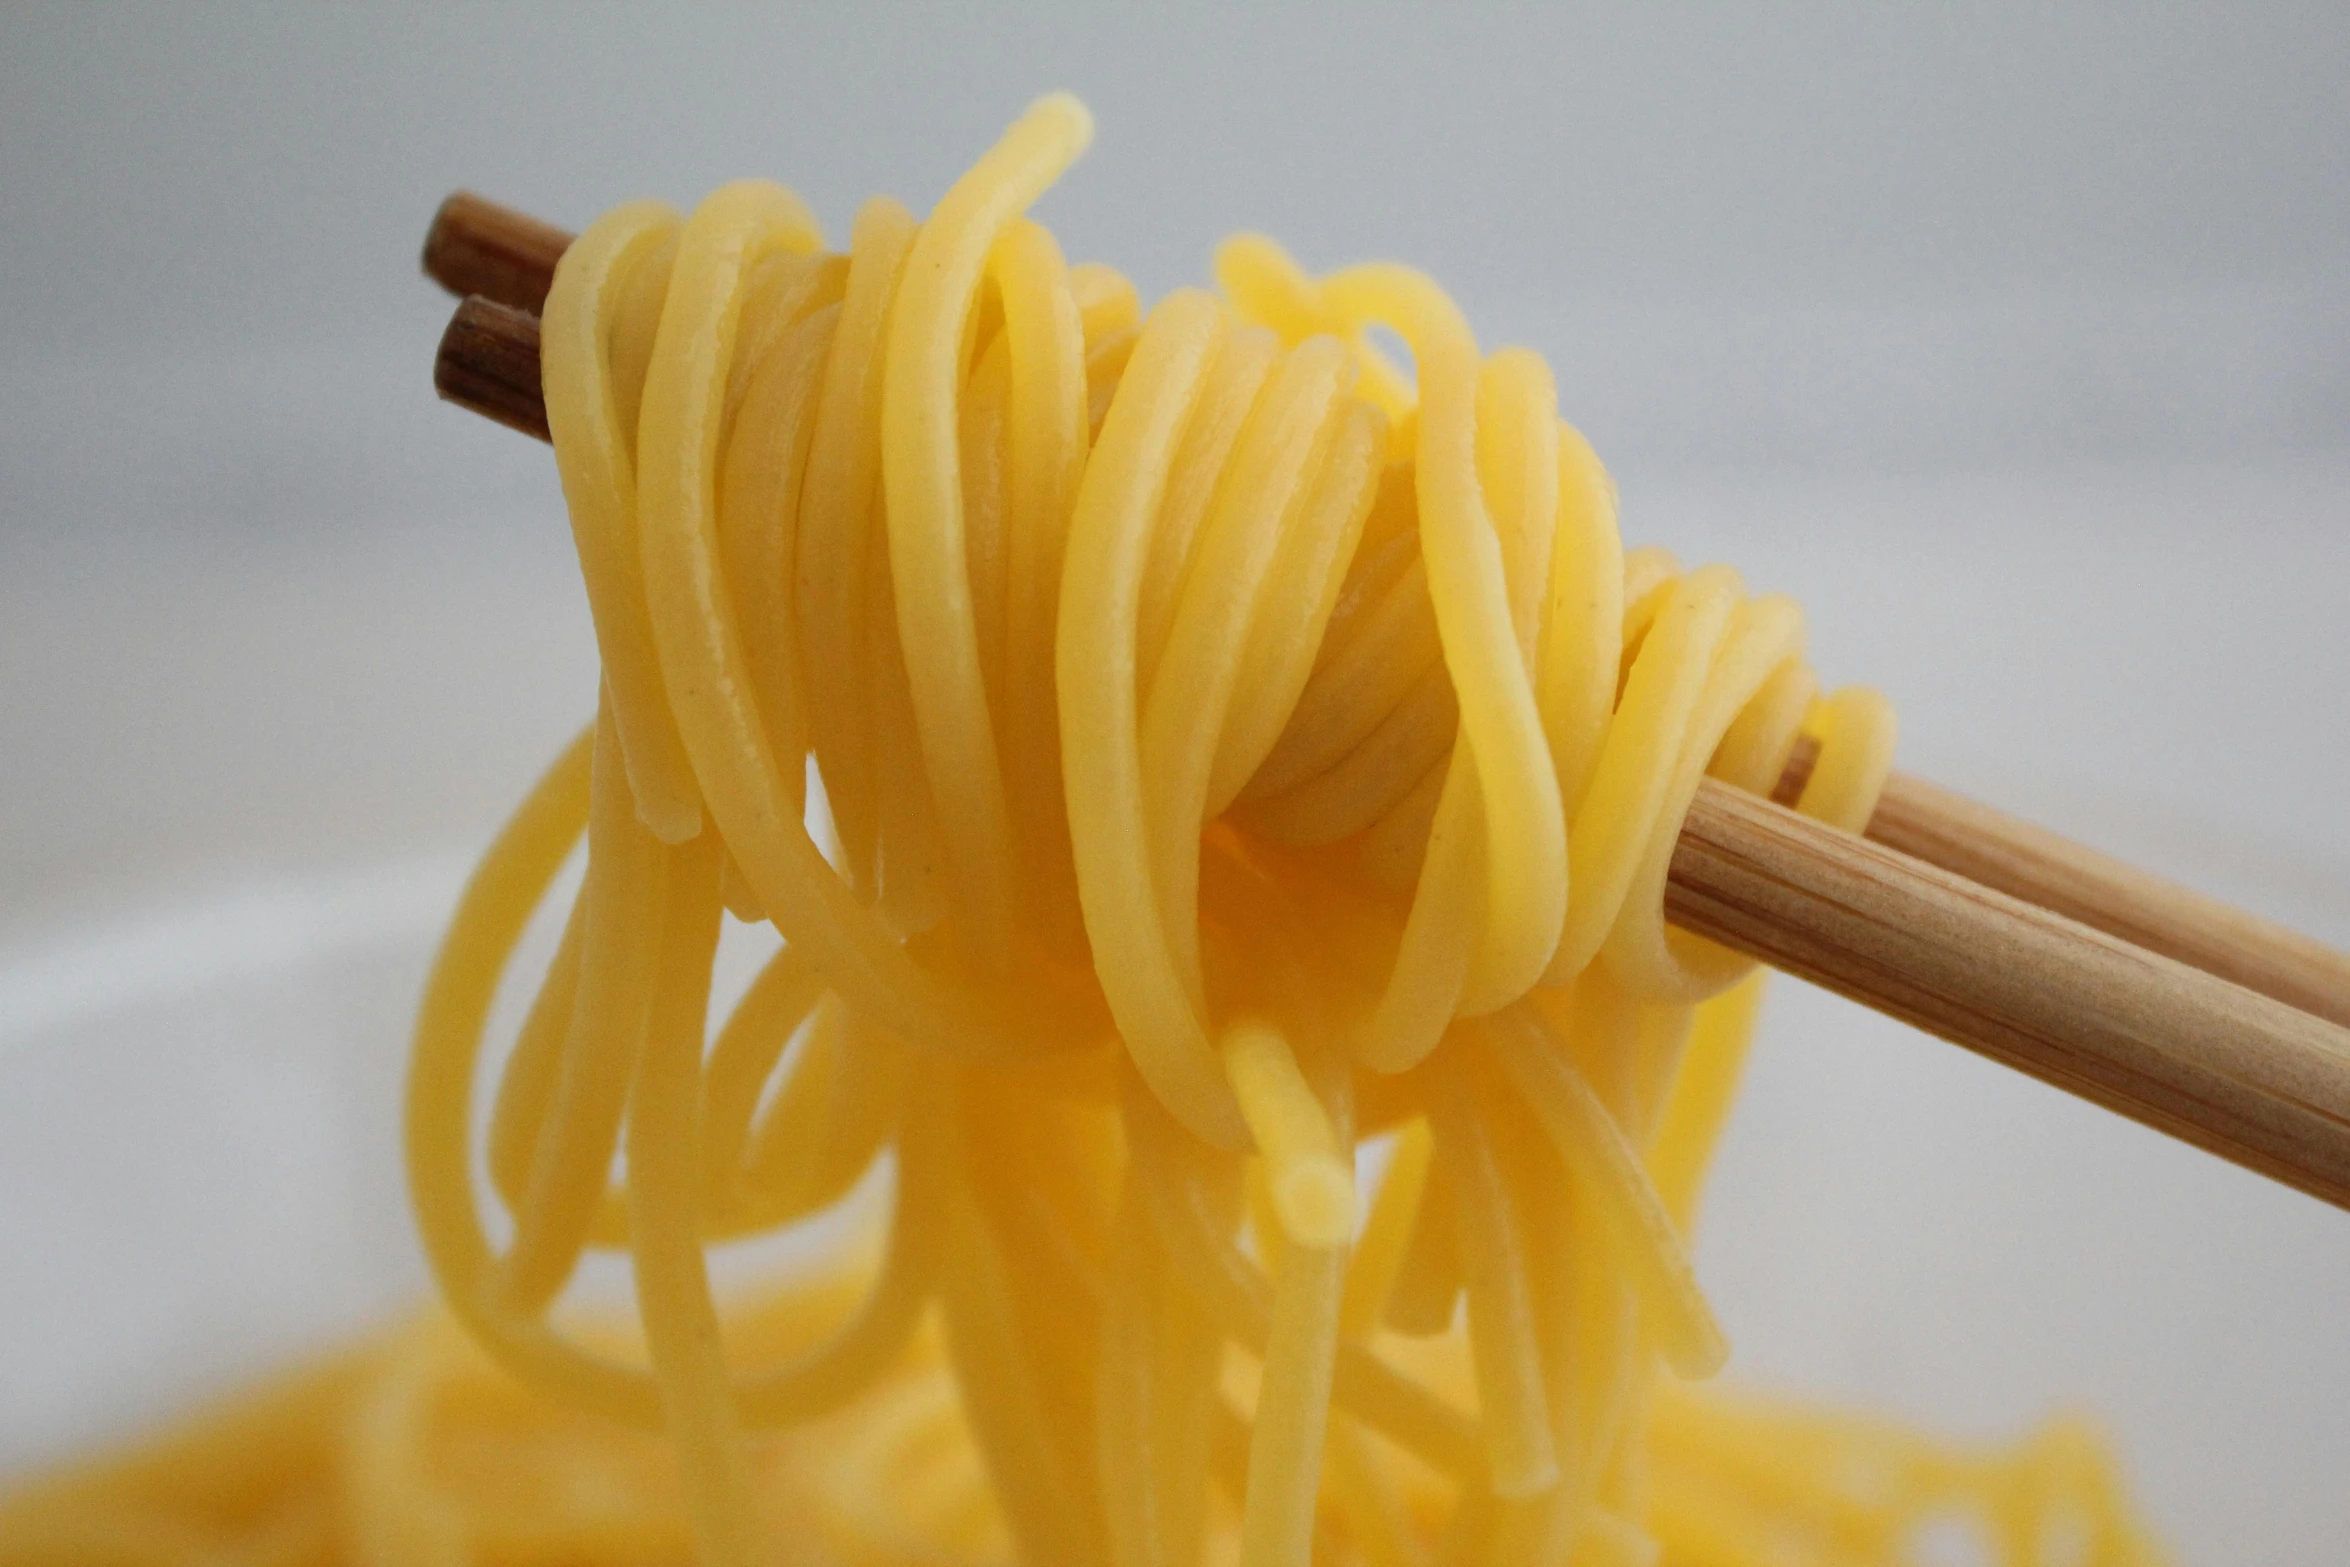 a bowl filled with noodles and two wooden chopsticks